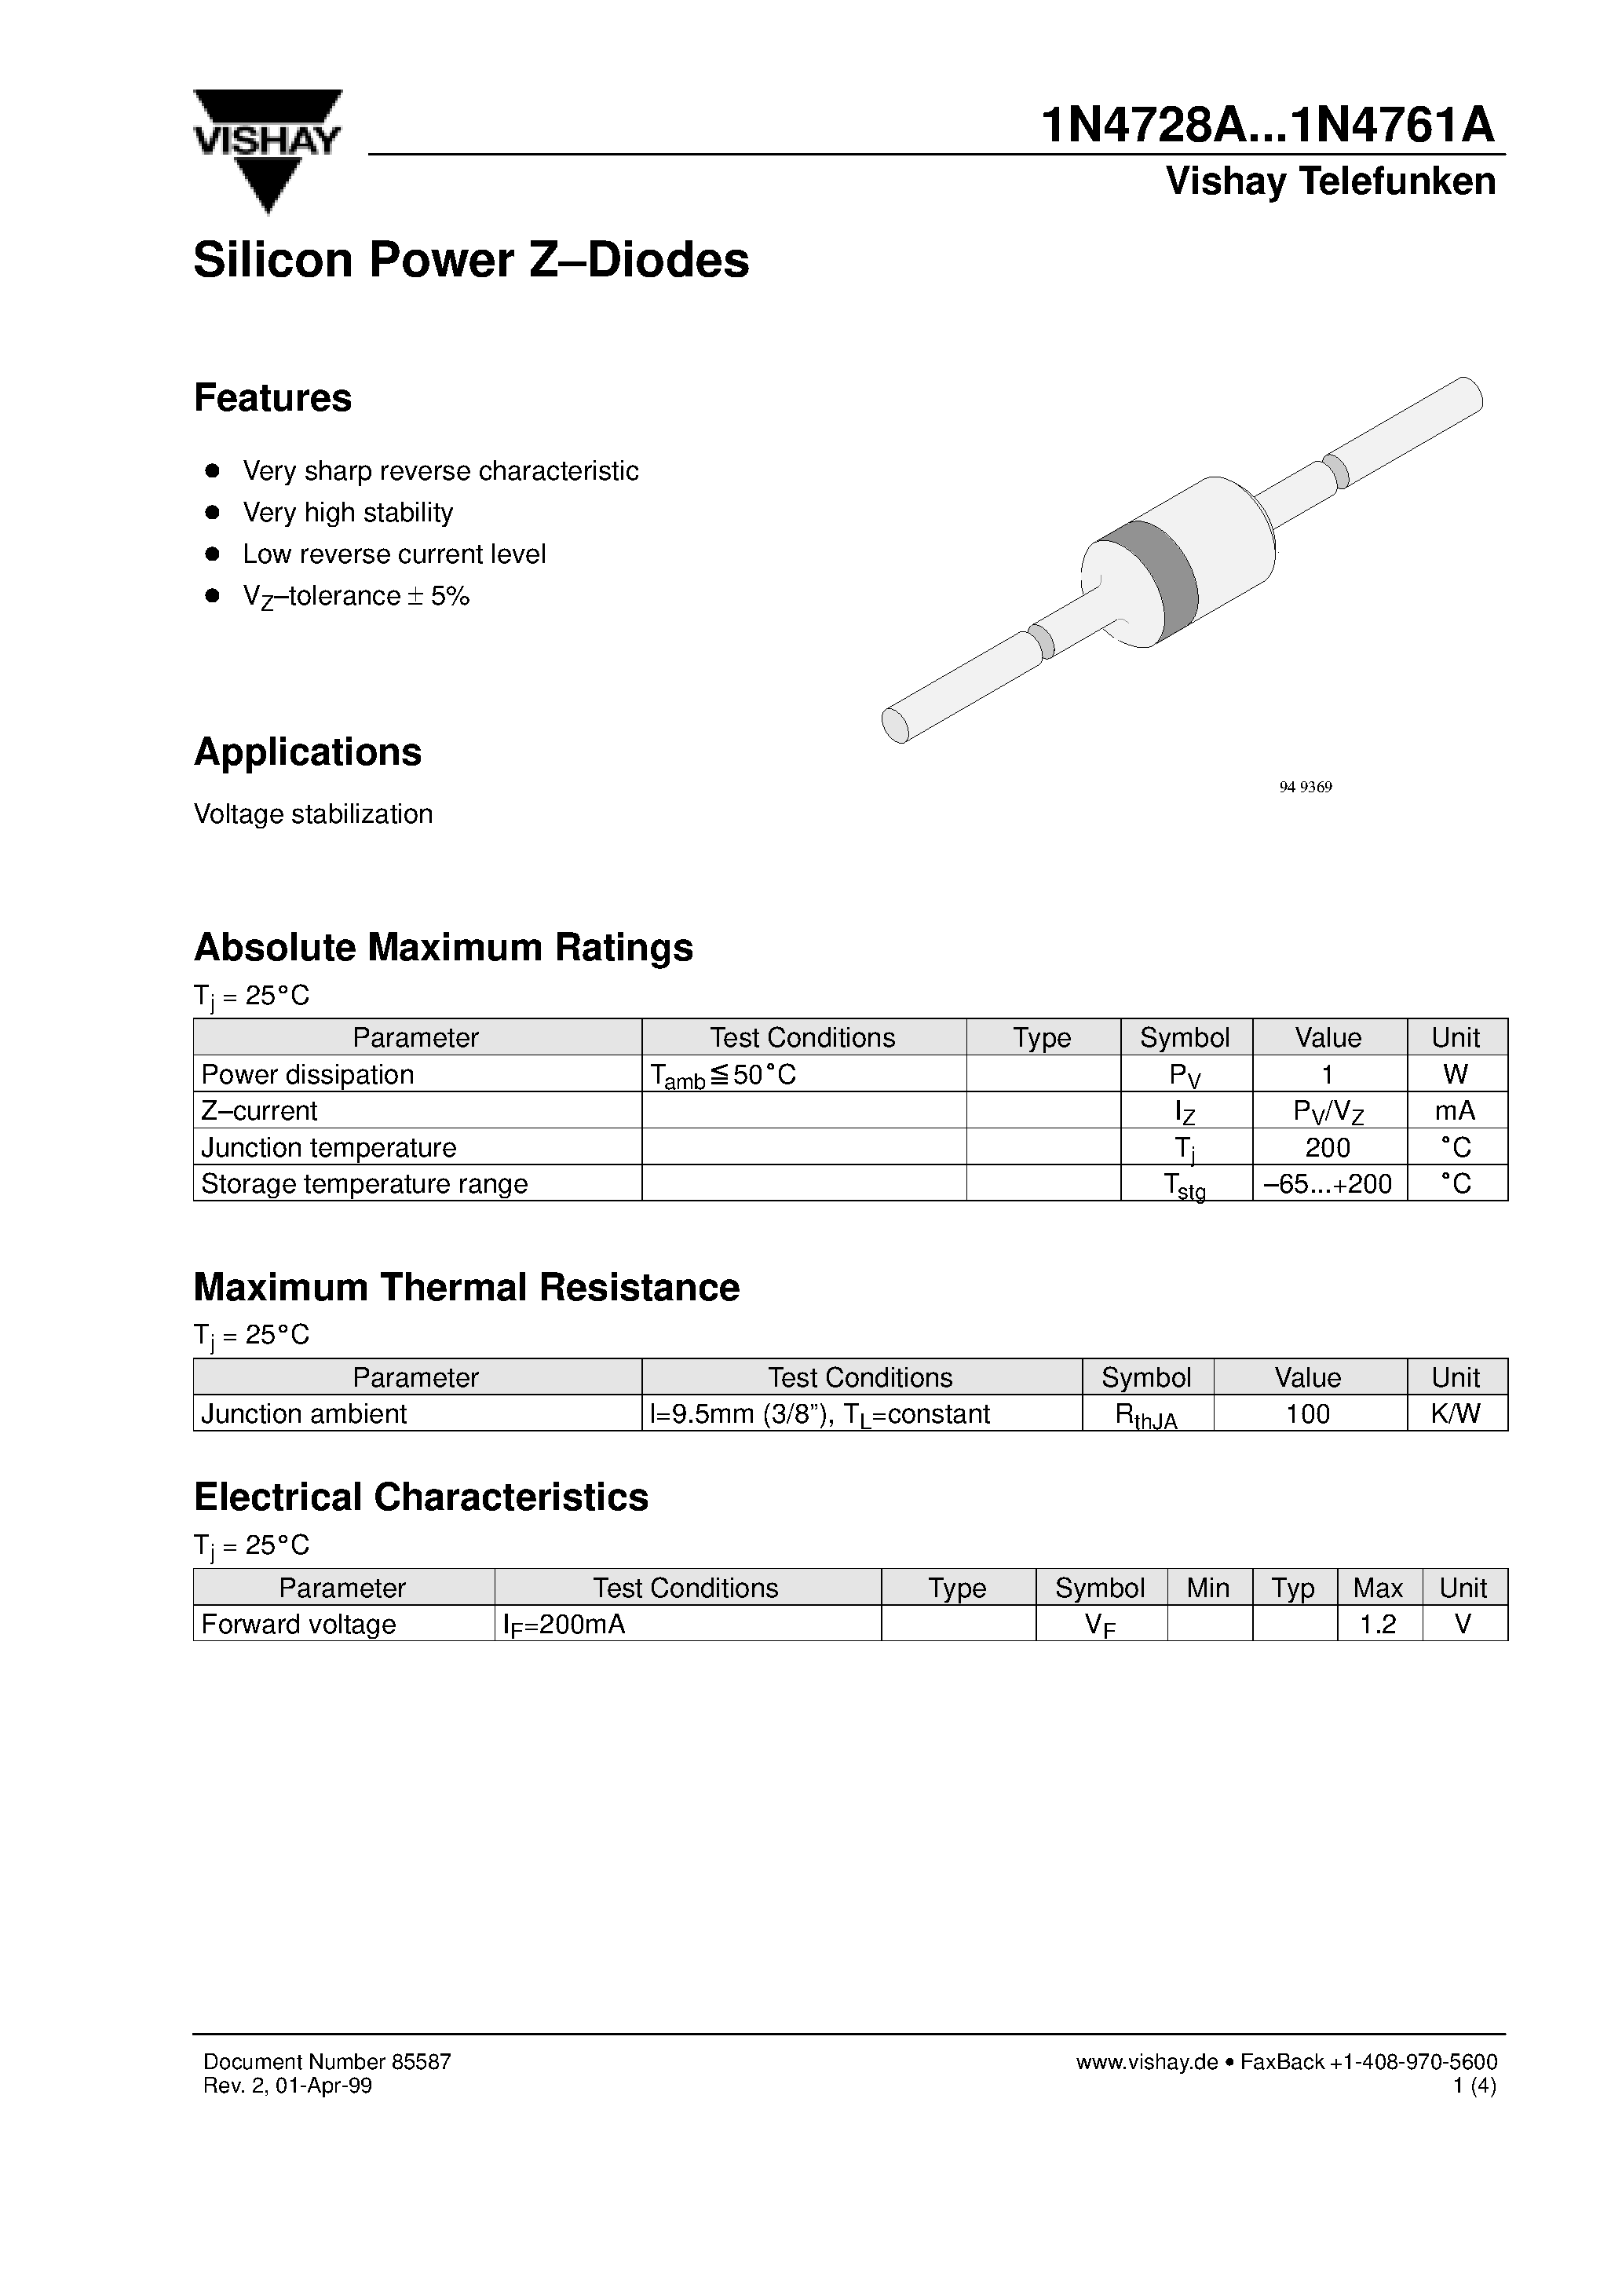 Datasheet 1N4760A - Silicon Power Z-Diodes page 1